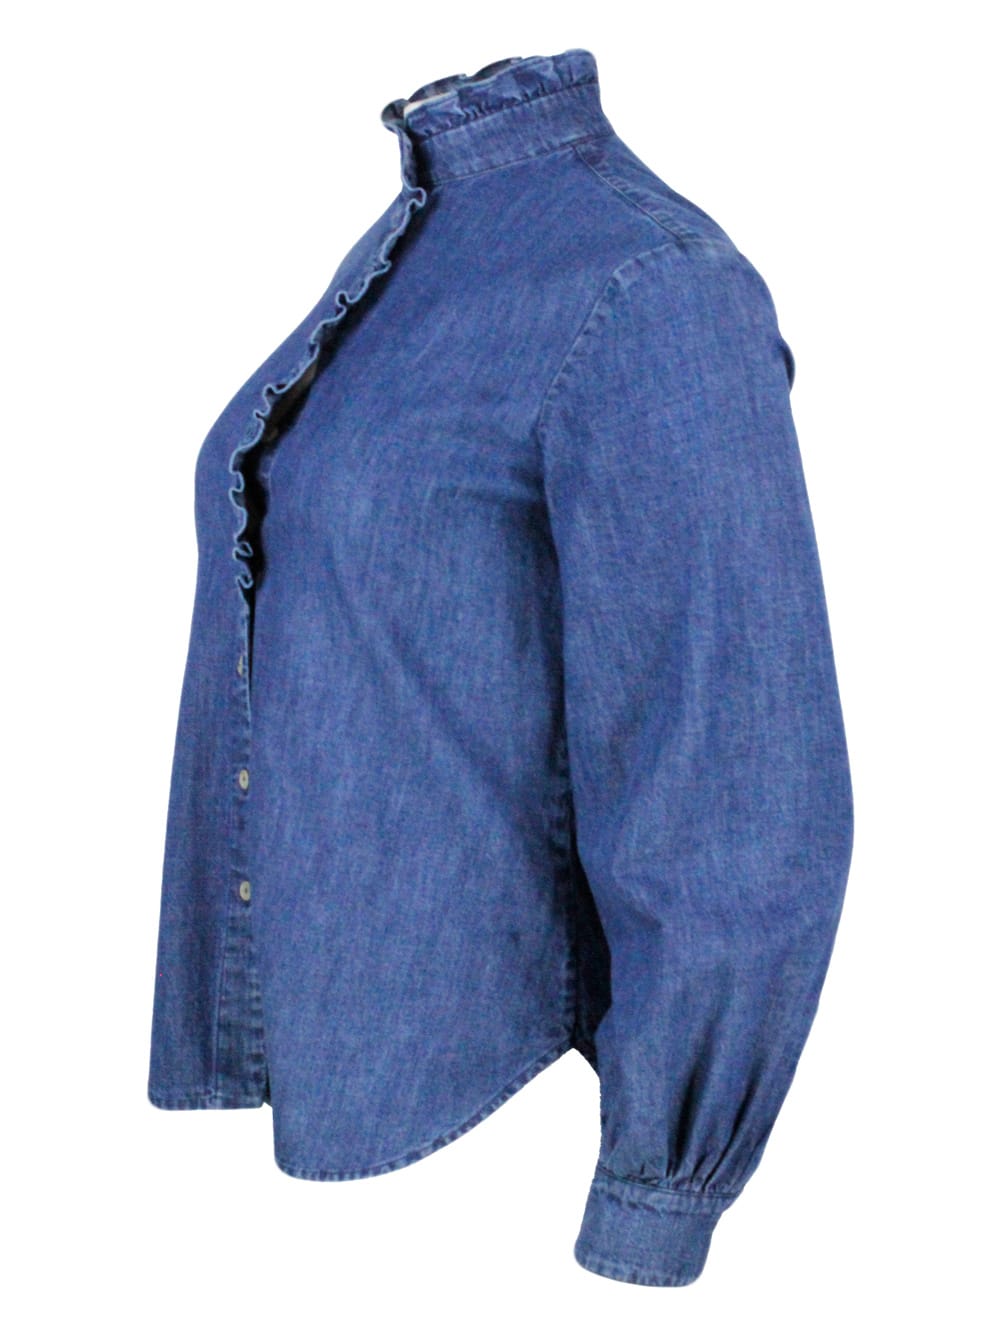 Shop Barba Napoli Long-sleeved Shirt In Fine Denim Embellished With Rouges On The Collar And Along The Buttons. Regula